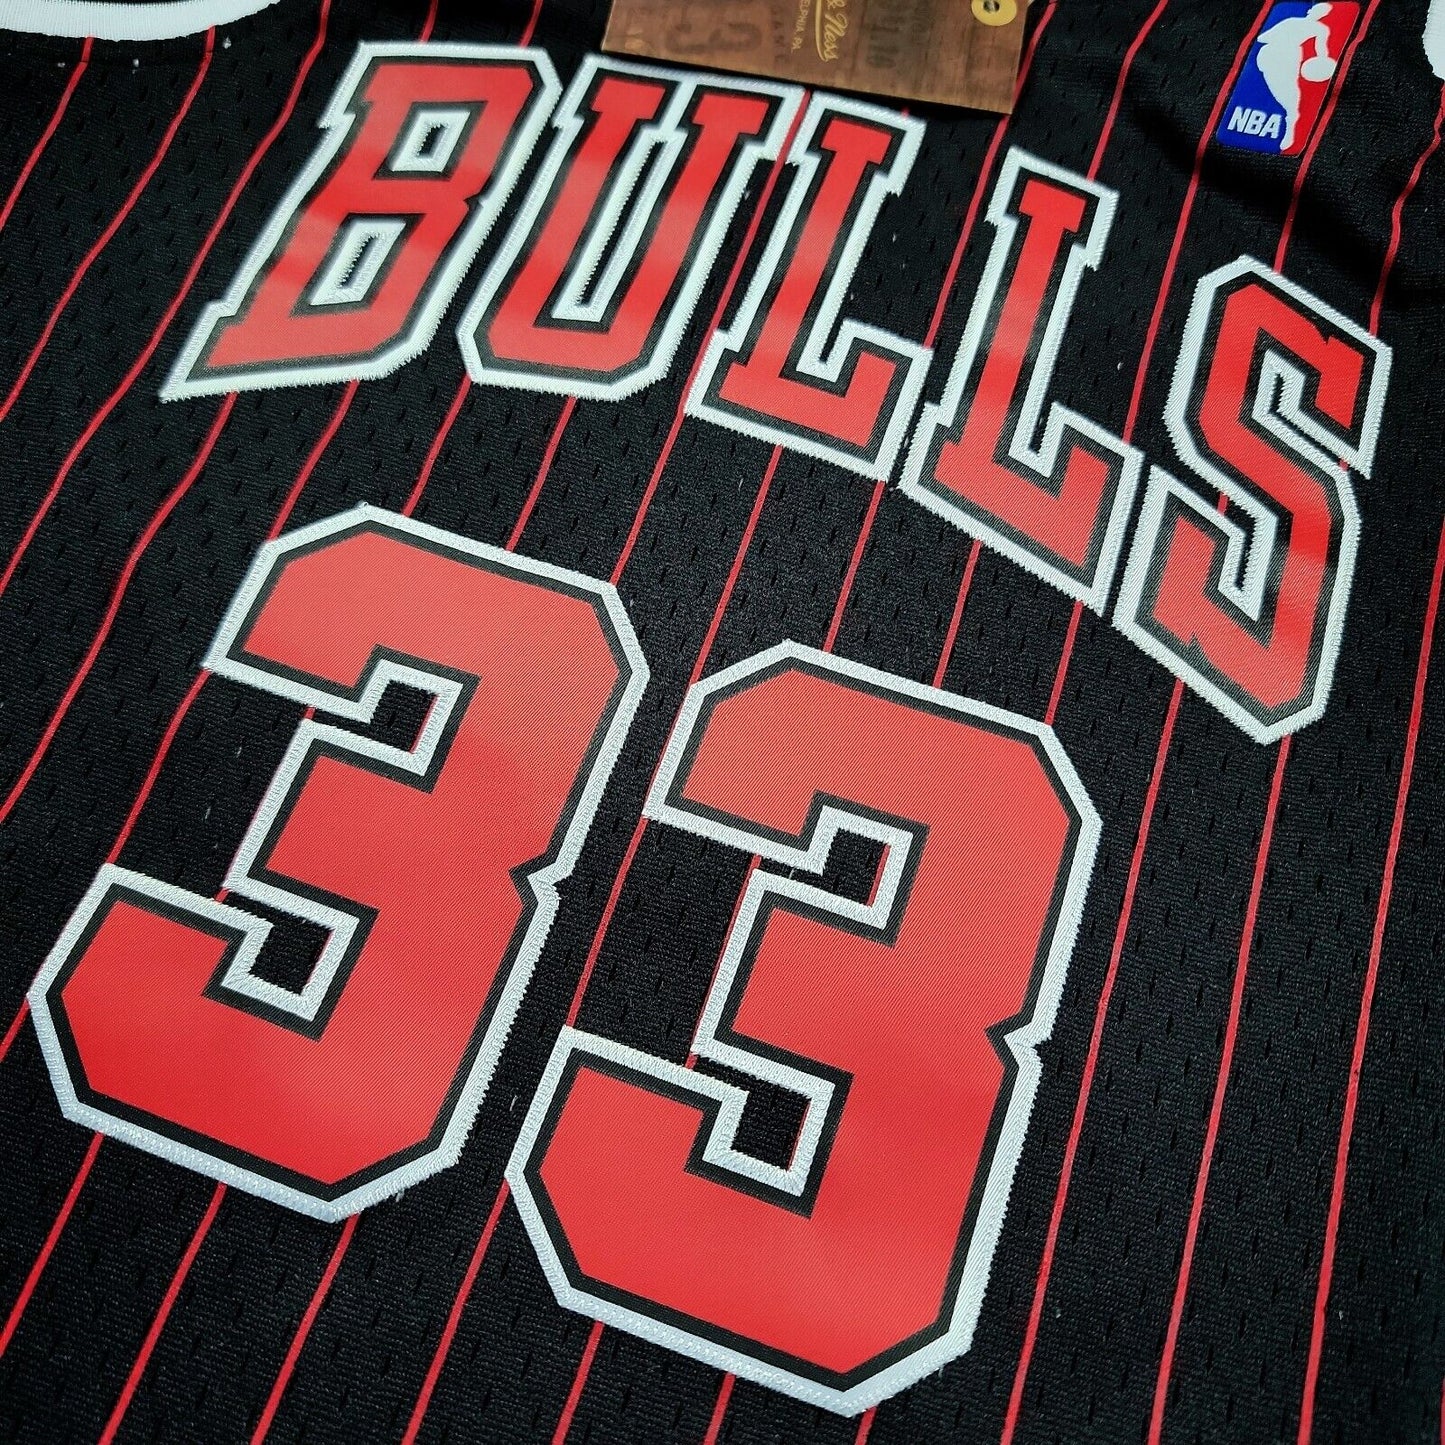 100% Authentic Scottie Pippen Mitchell Ness 95 96 Bulls Jersey Youth XL 18/20